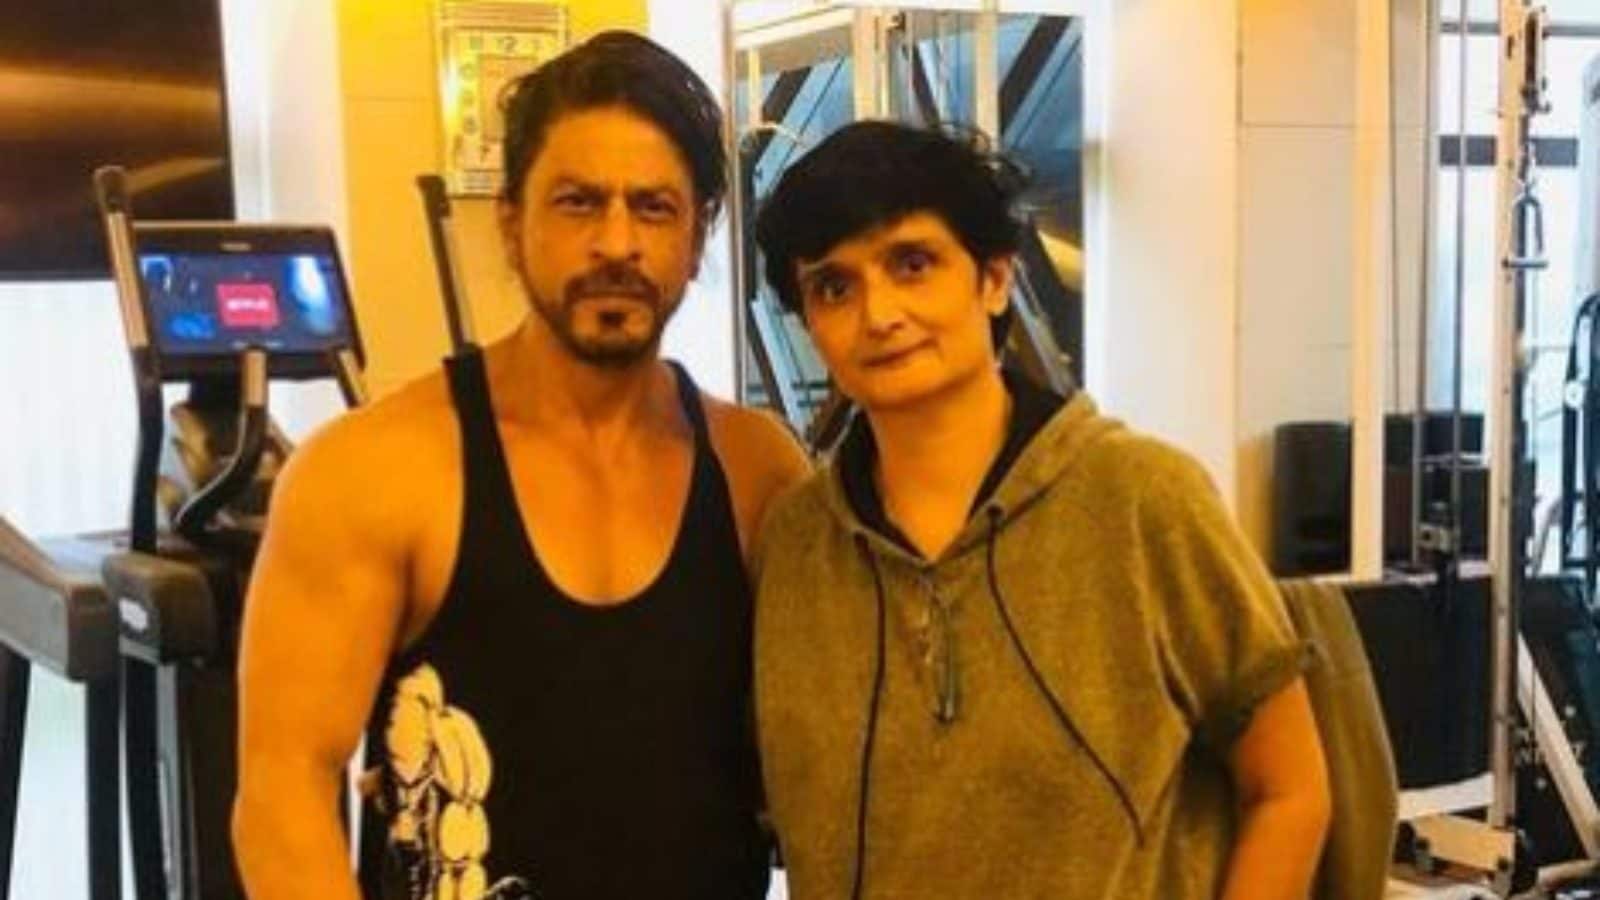 Shah Rukh Khan Shows Pathaan Hotness In This Unseen Muscular Pic From Health Club Followers